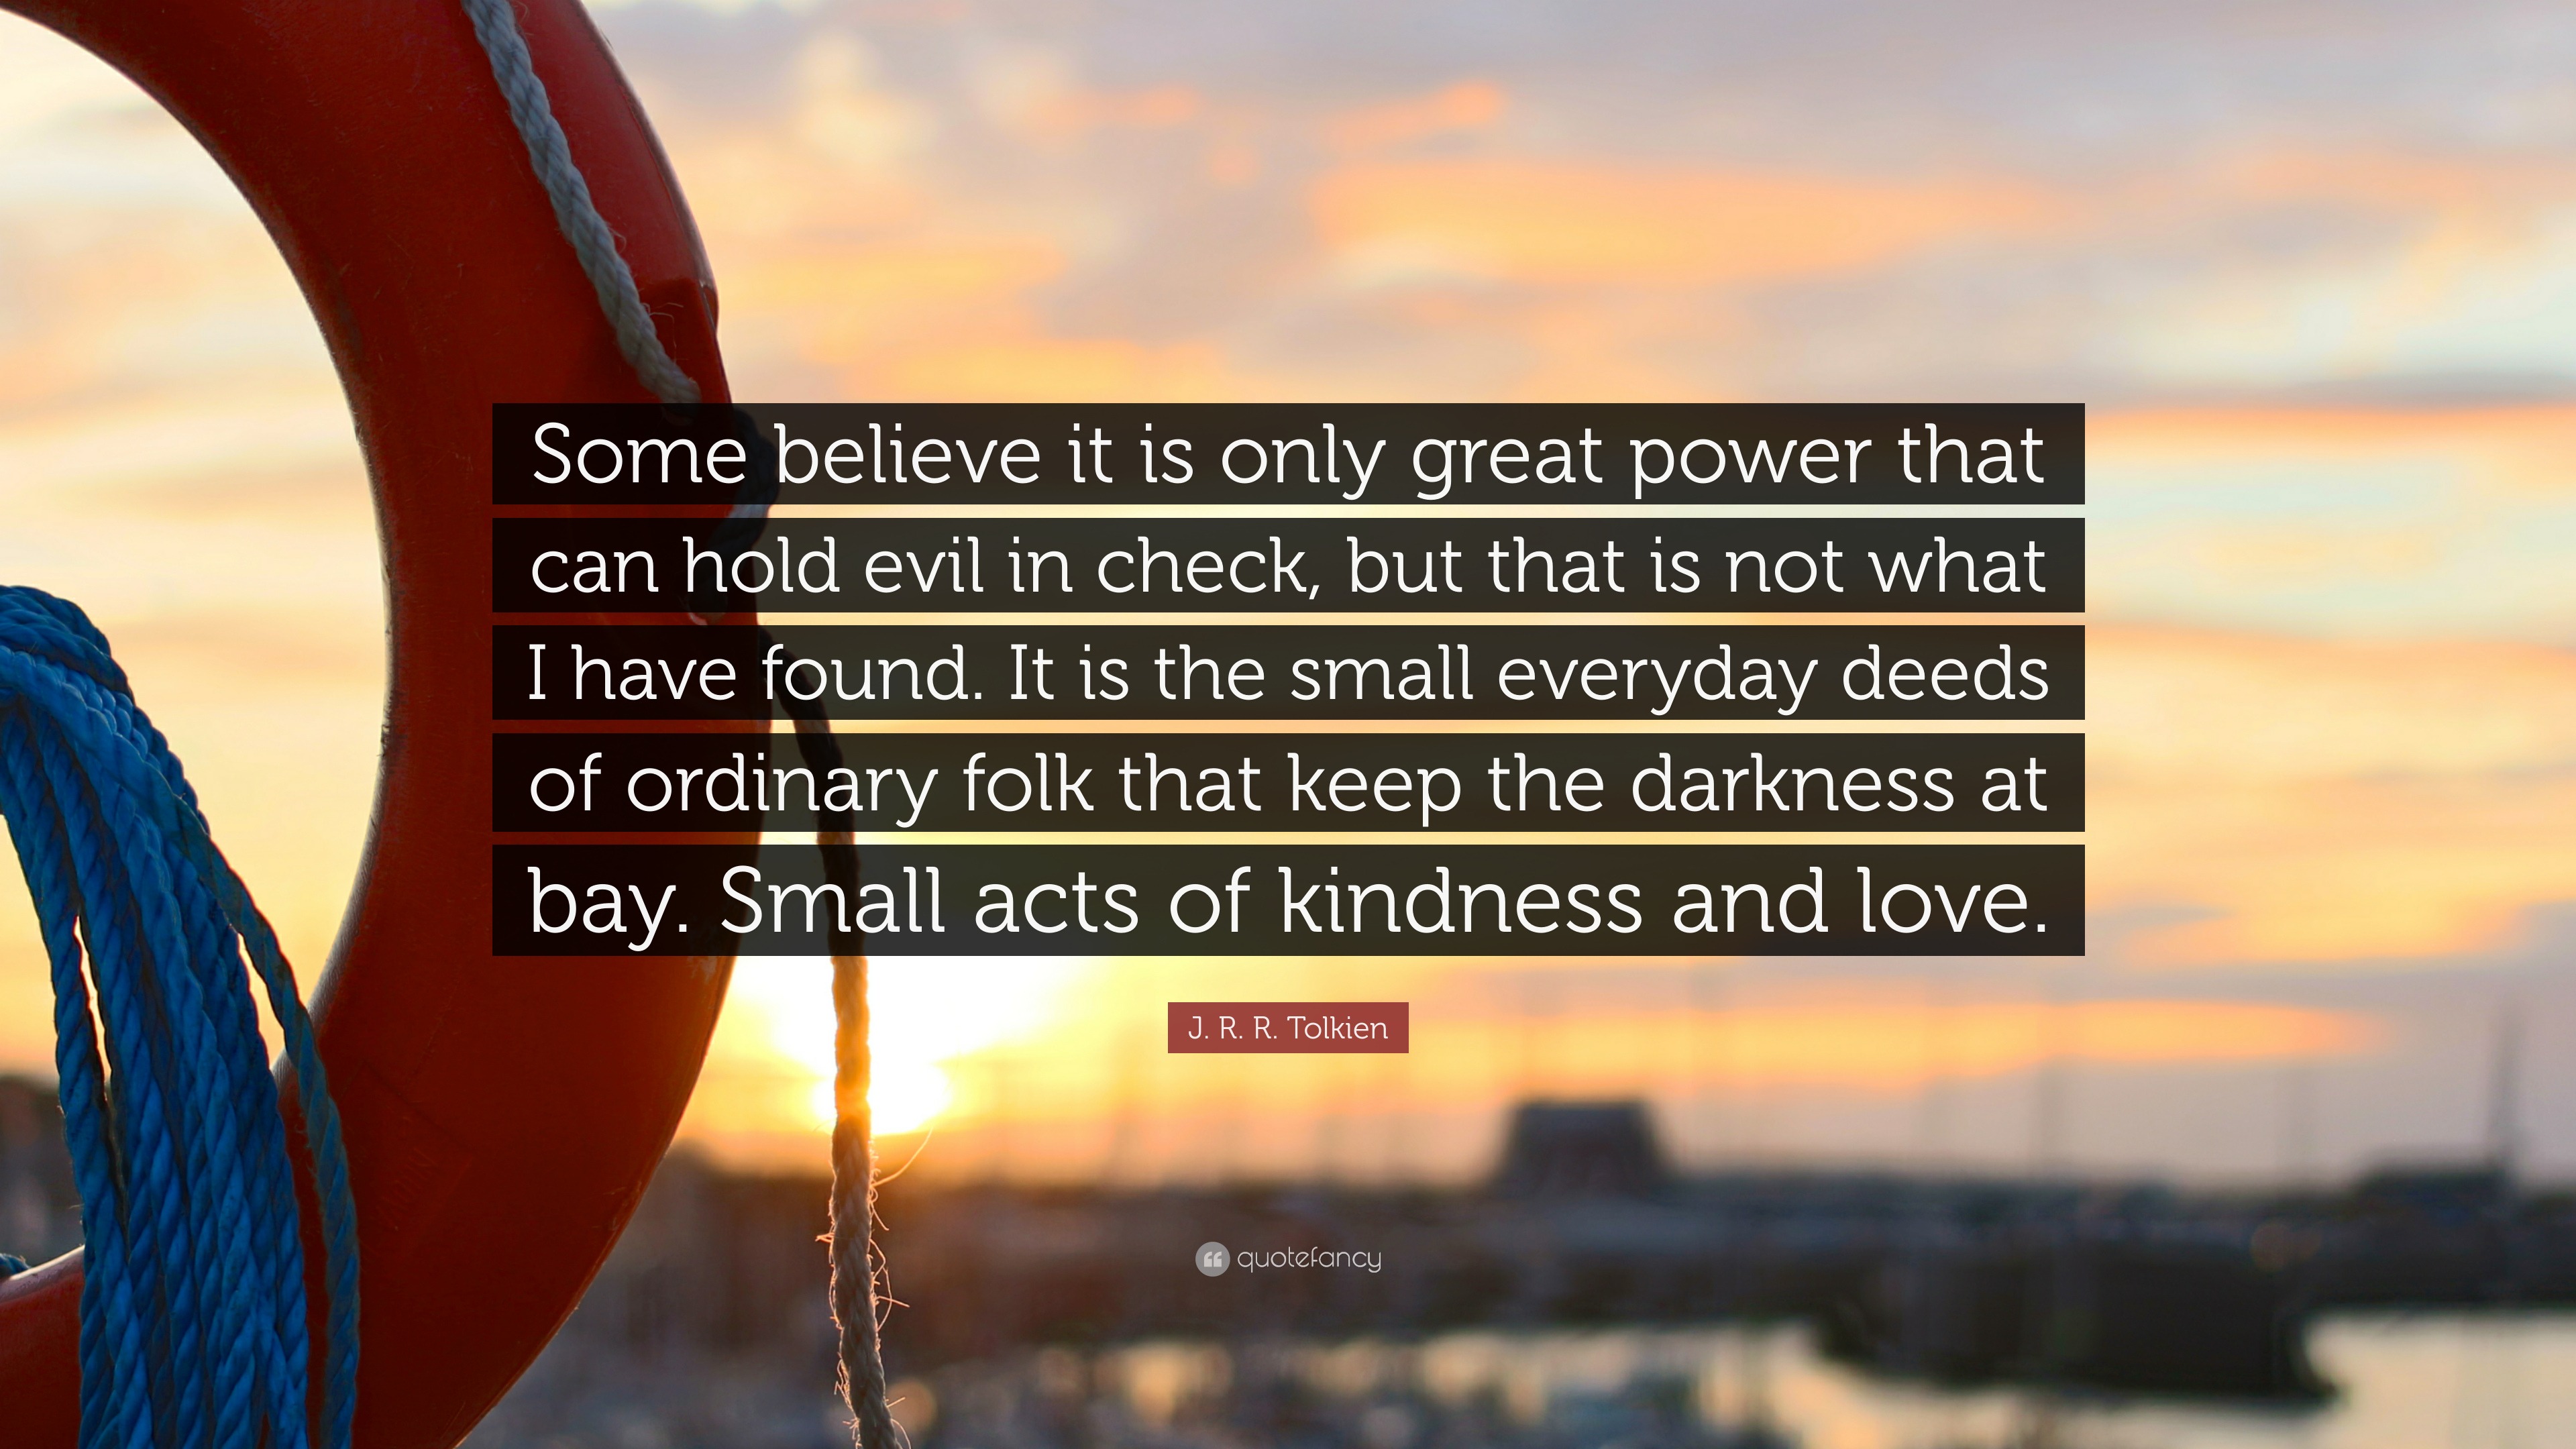 Kindness Quotes (40 wallpapers) - Quotefancy